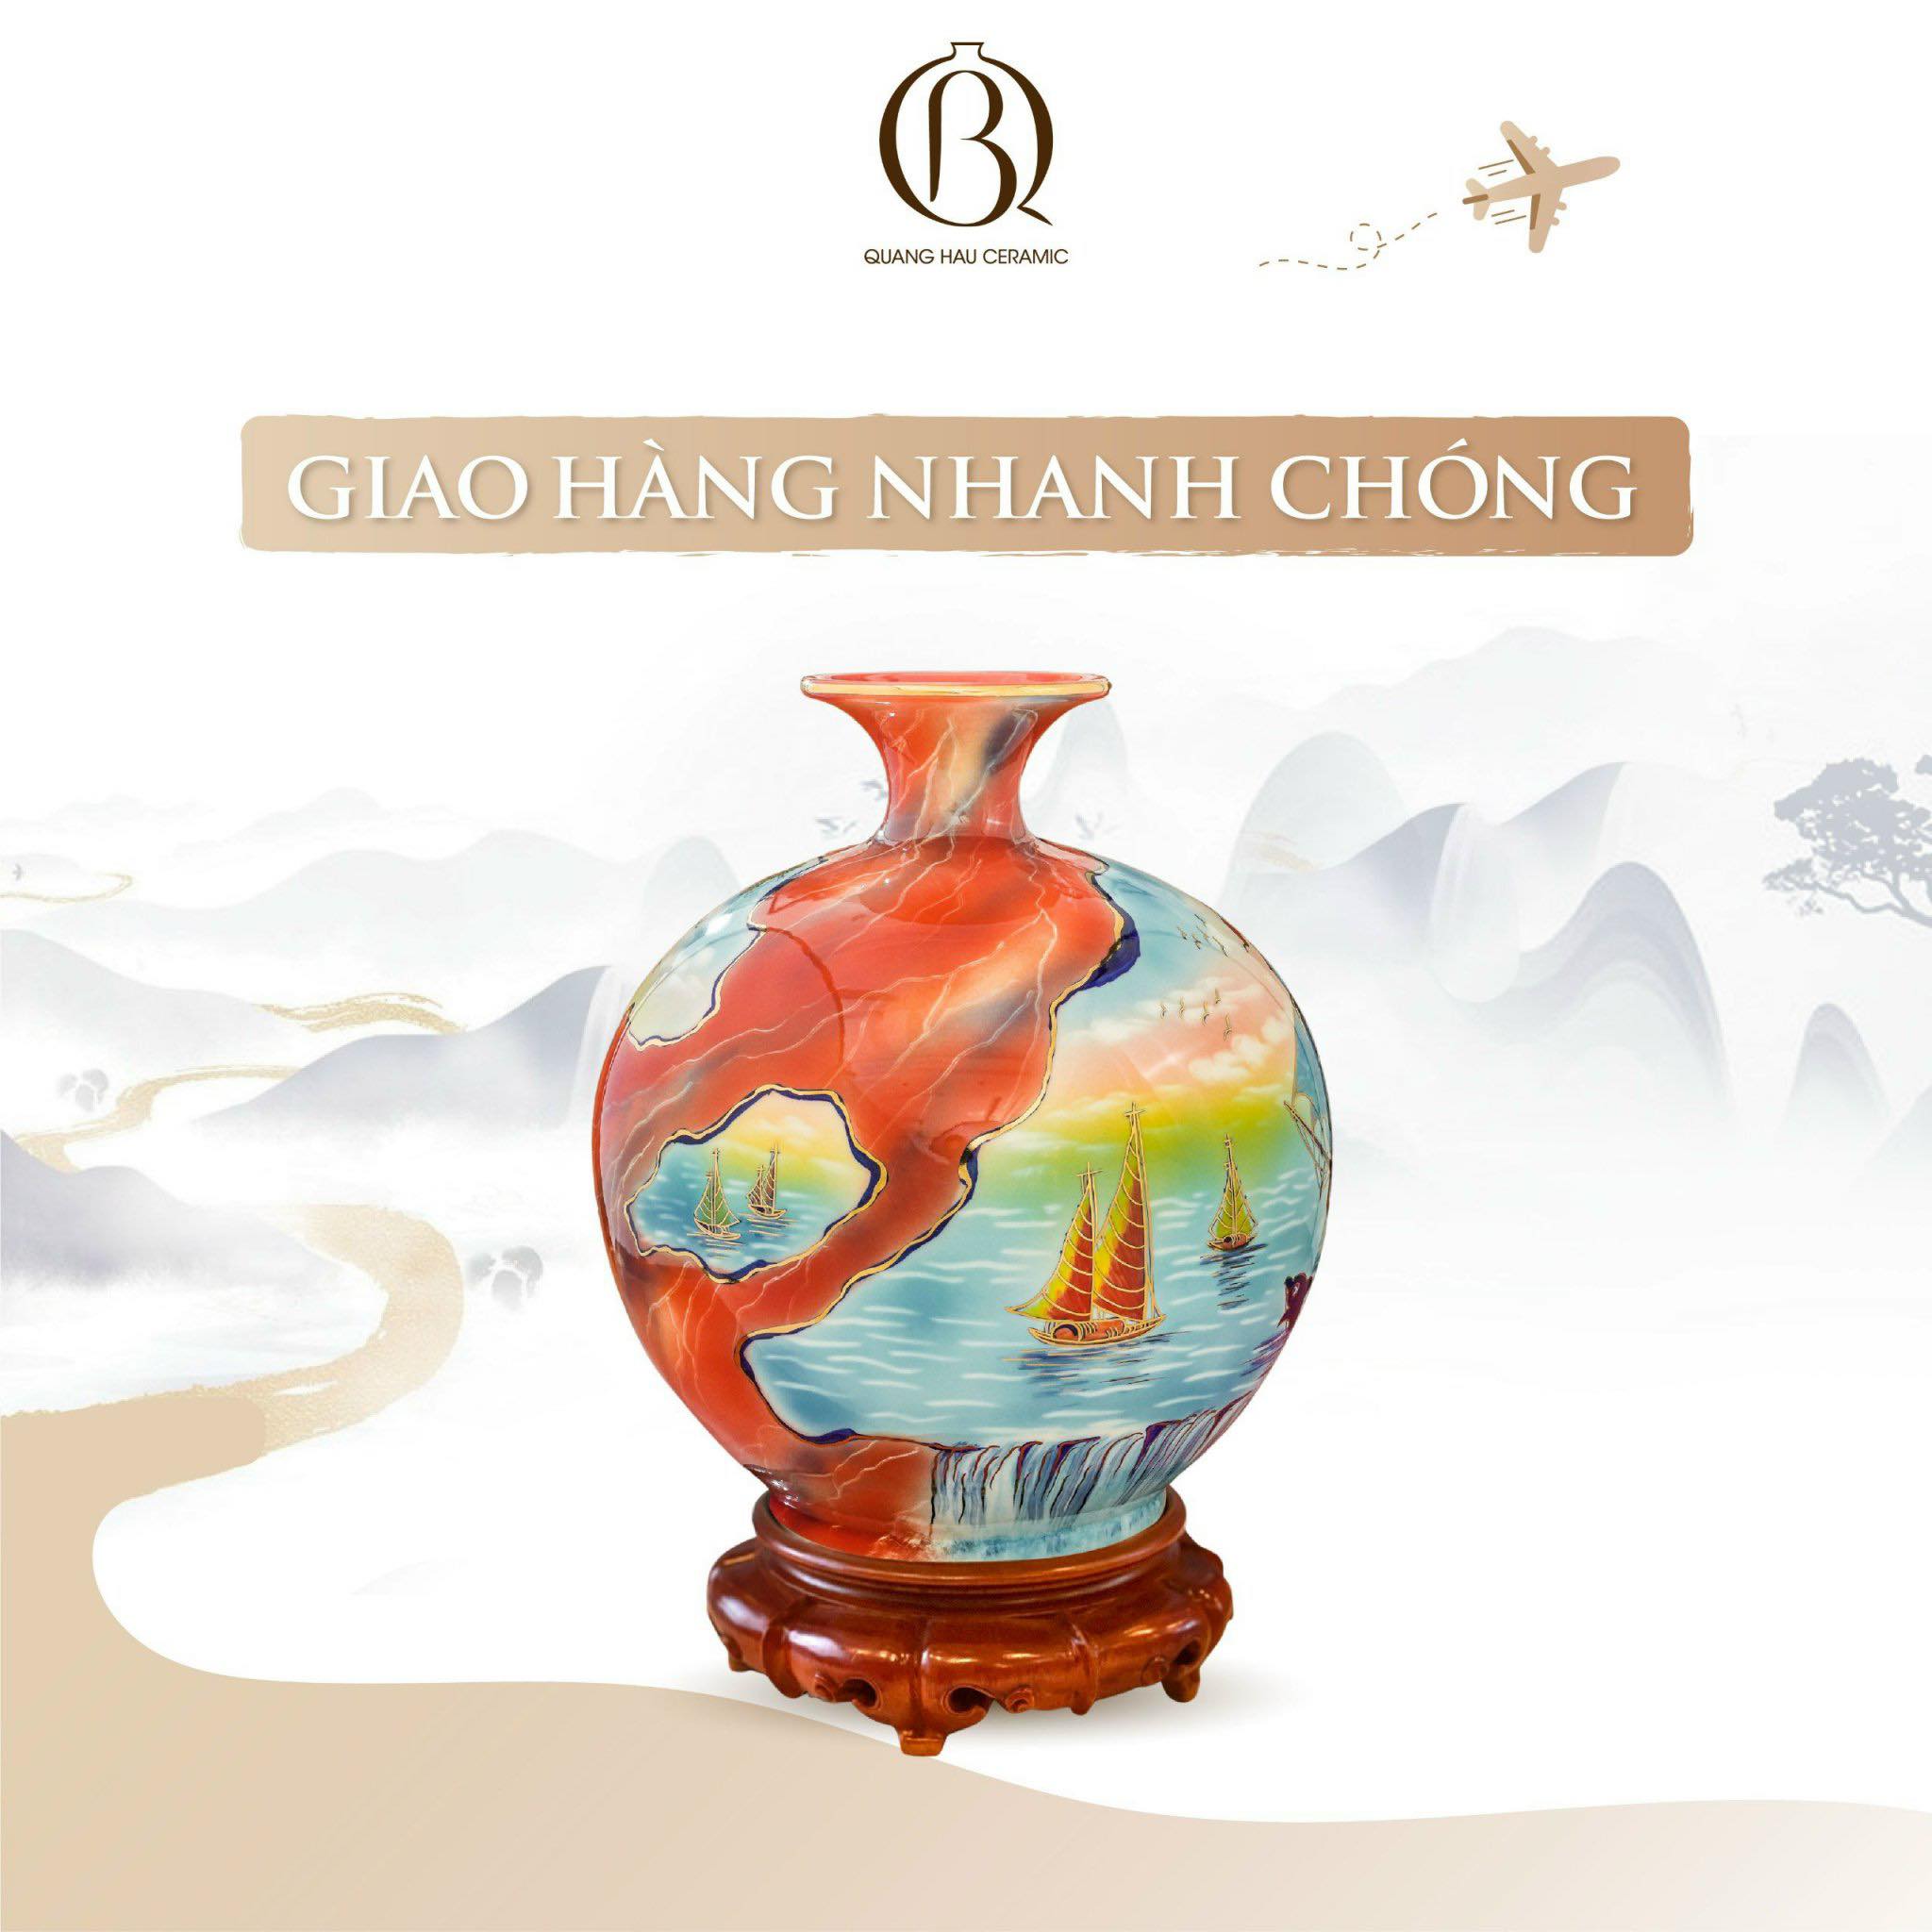 Quang Hau Ceramic Worldwide shipping available now 3